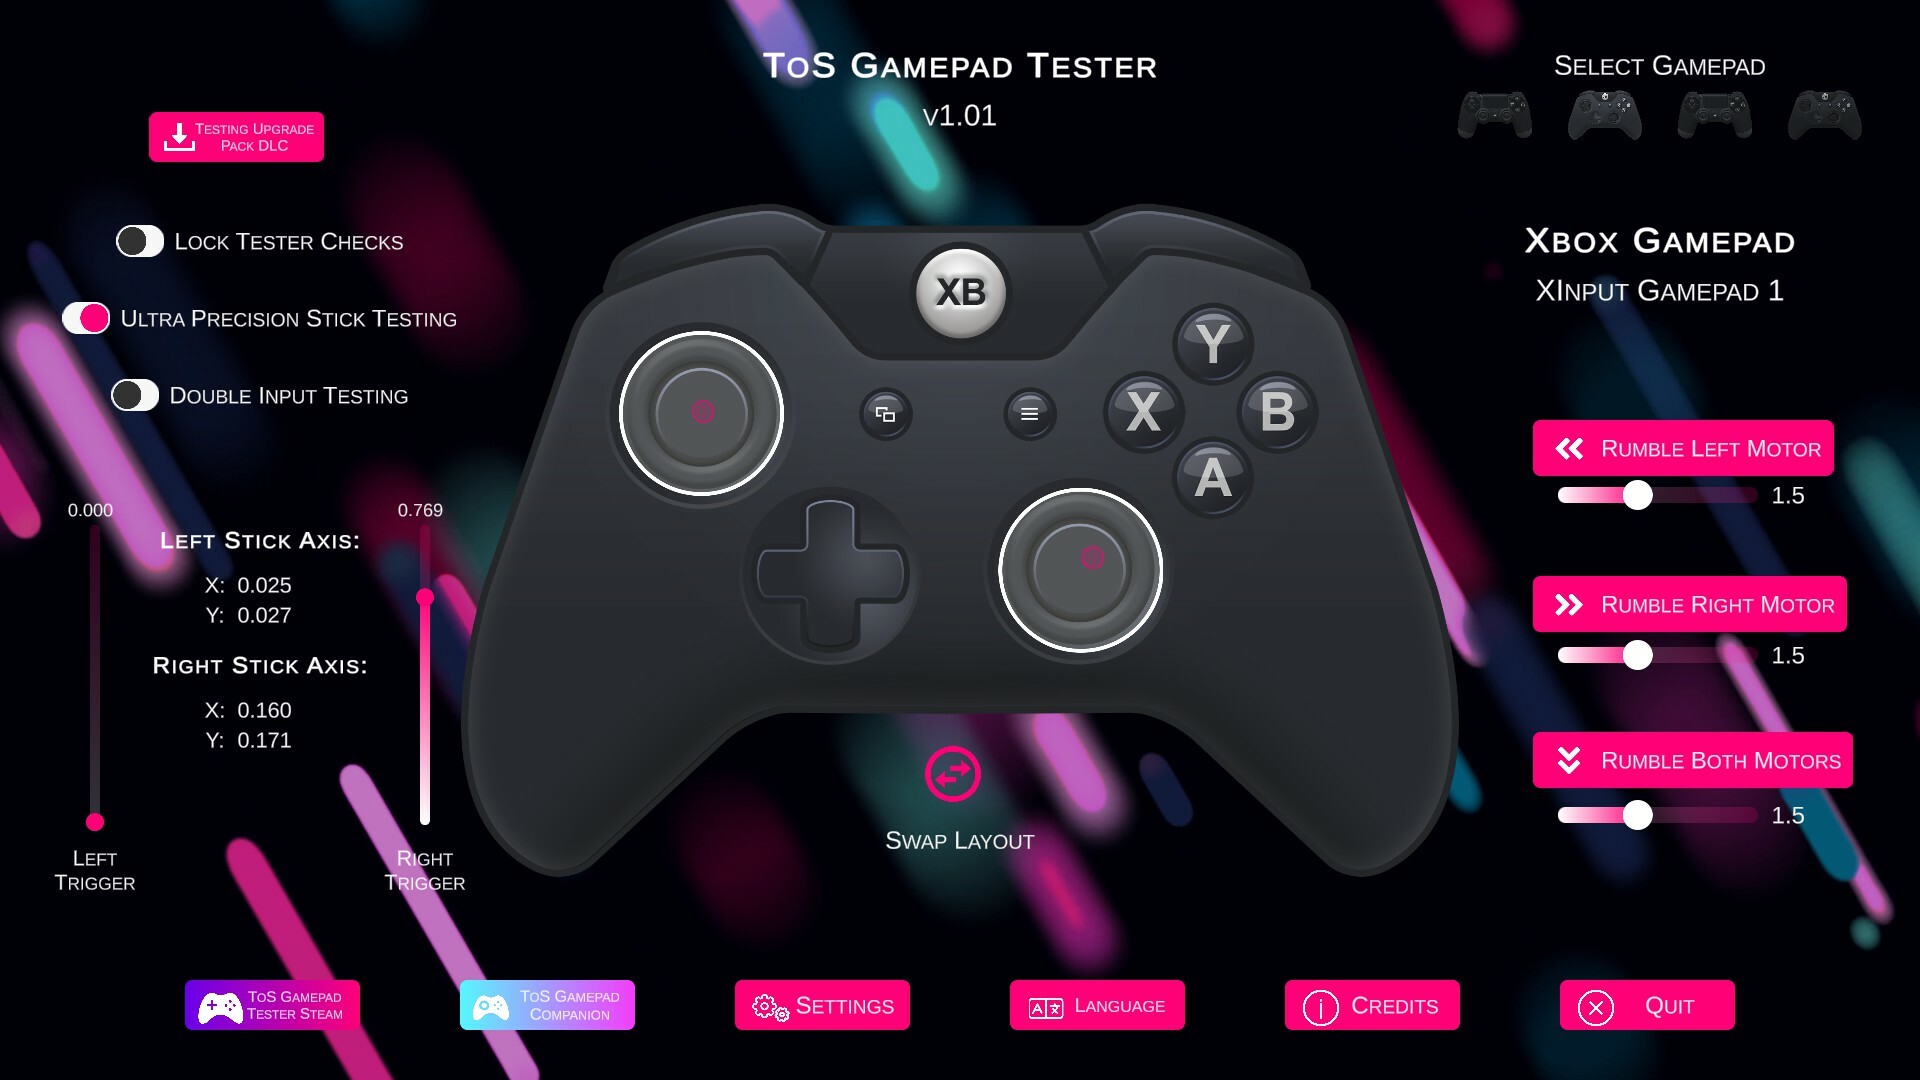 ToS Gamepad Tester on Steam